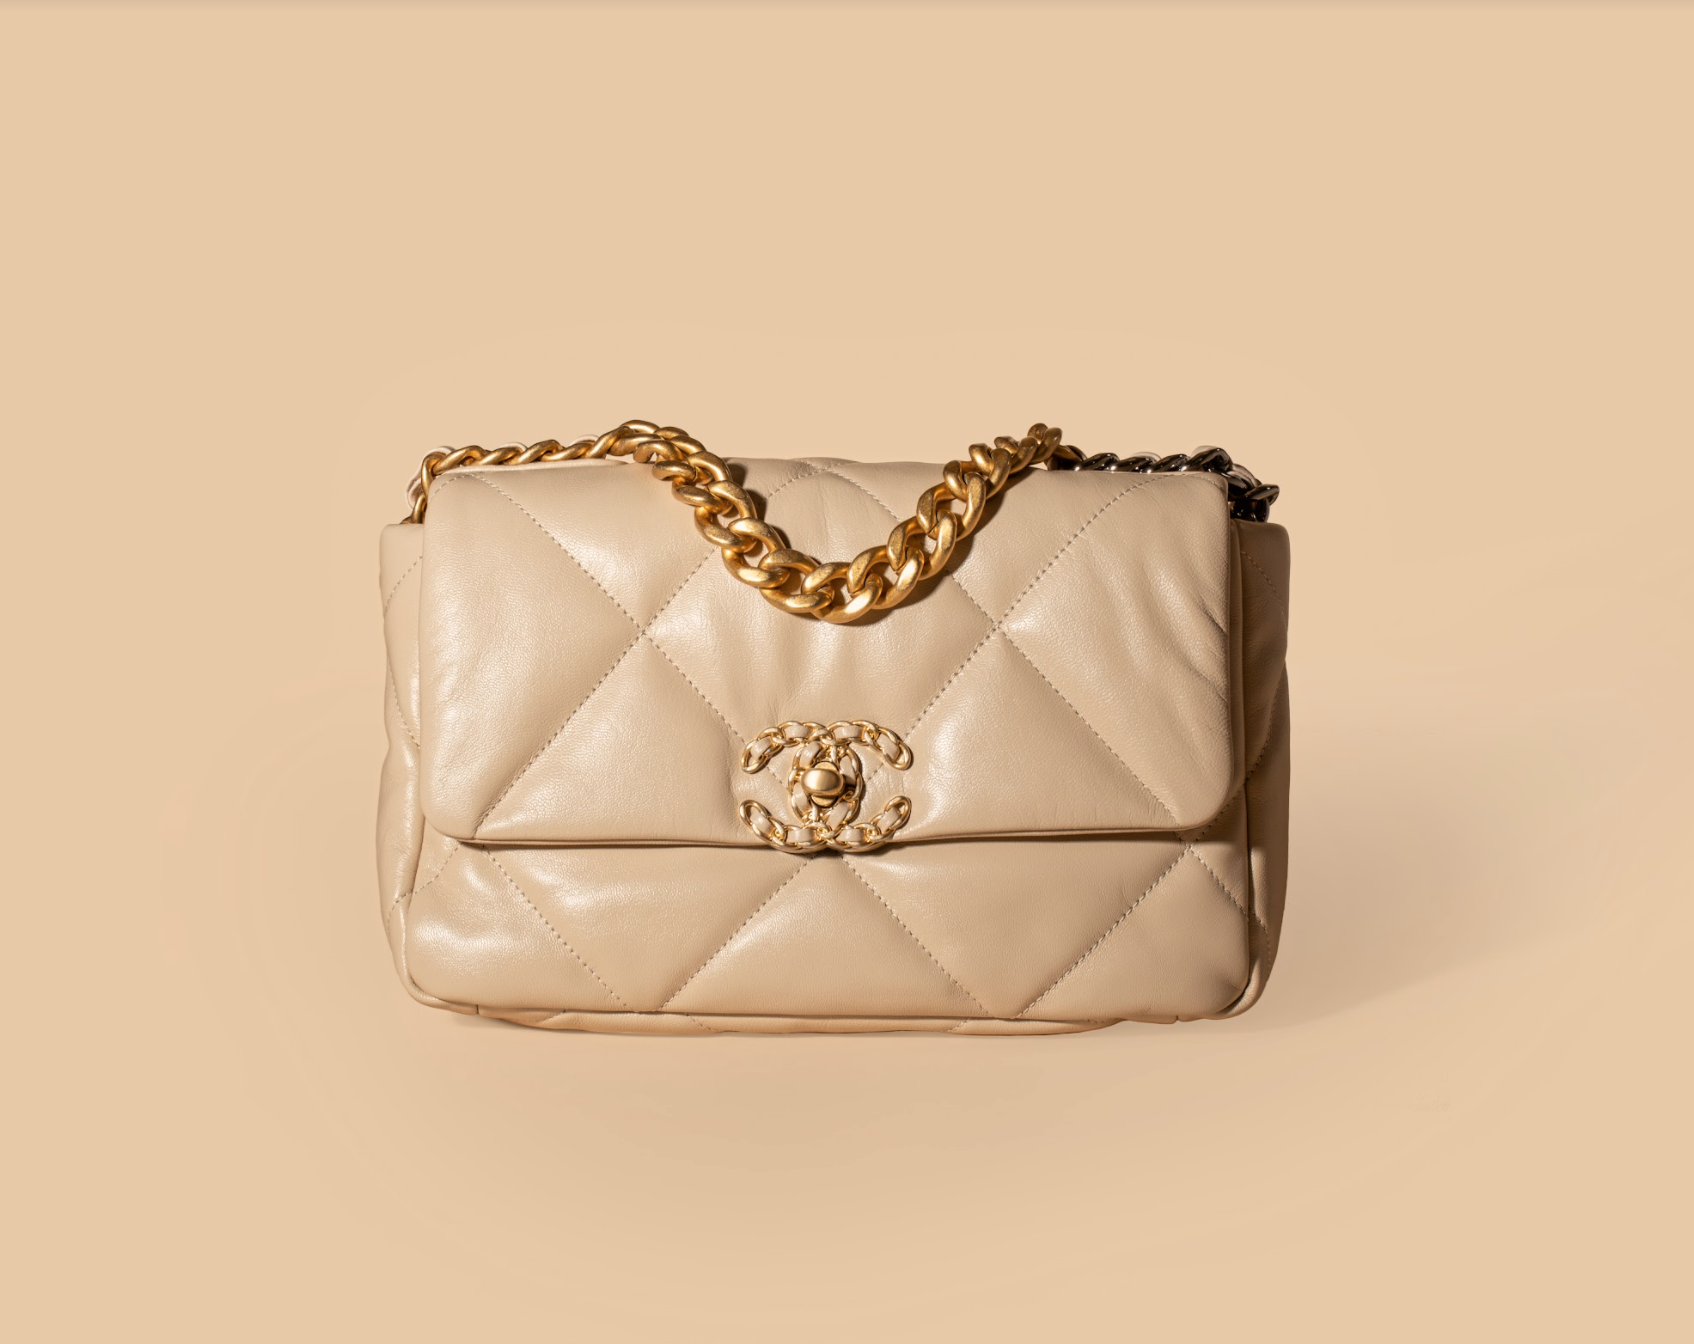 Top 7 Most Affordable Chanel Bags | WP Diamonds